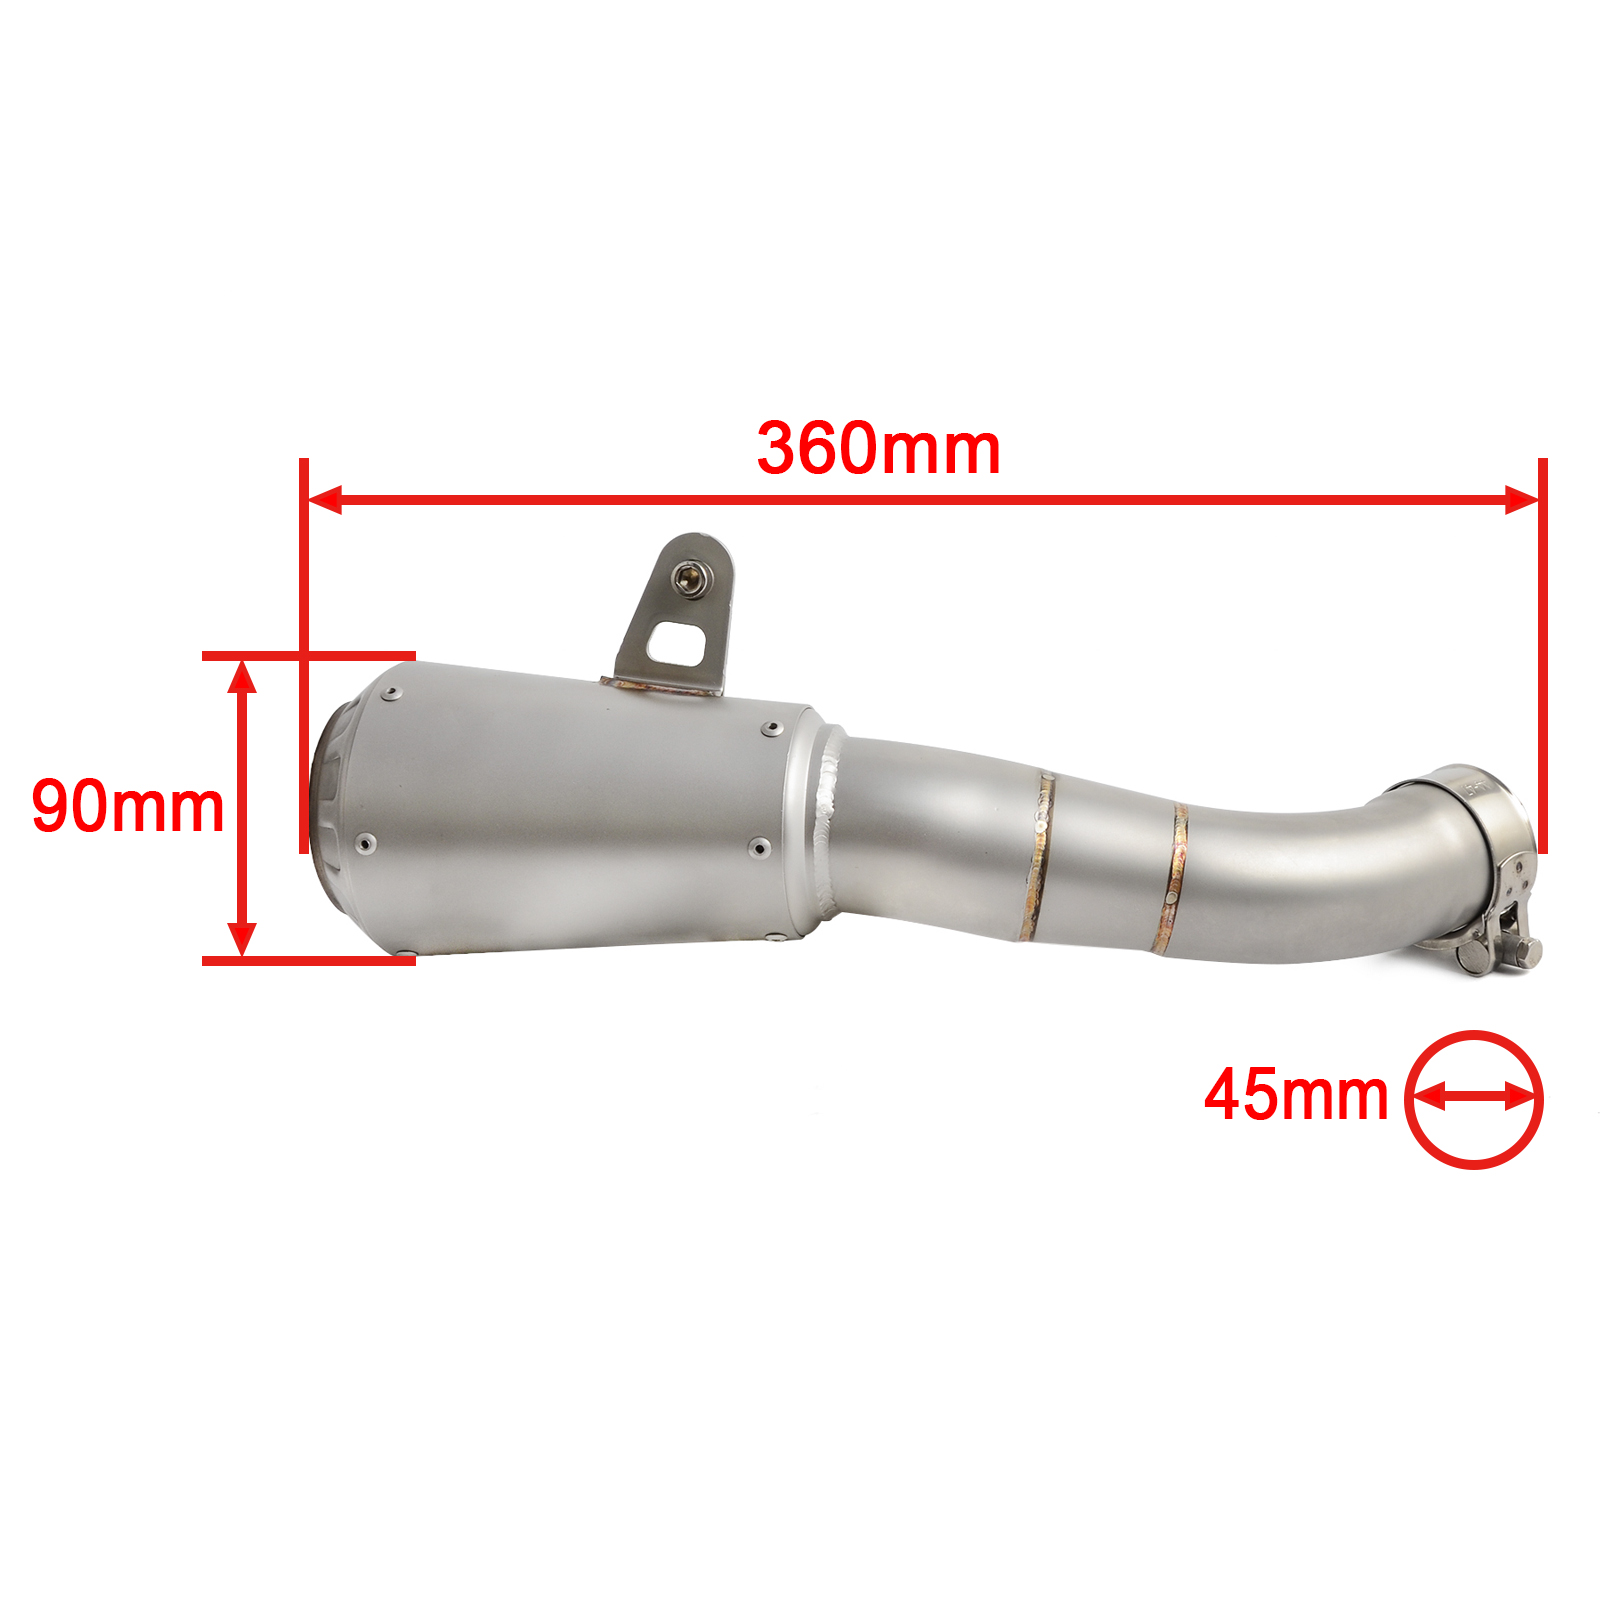 Exhaust Muffler Pipe For Yamaha YZFR3 YZF R3 2015 2016 2017 2018 2019 2020 2021 YZF-R3 YZF-R3 Motorcycle Accessories